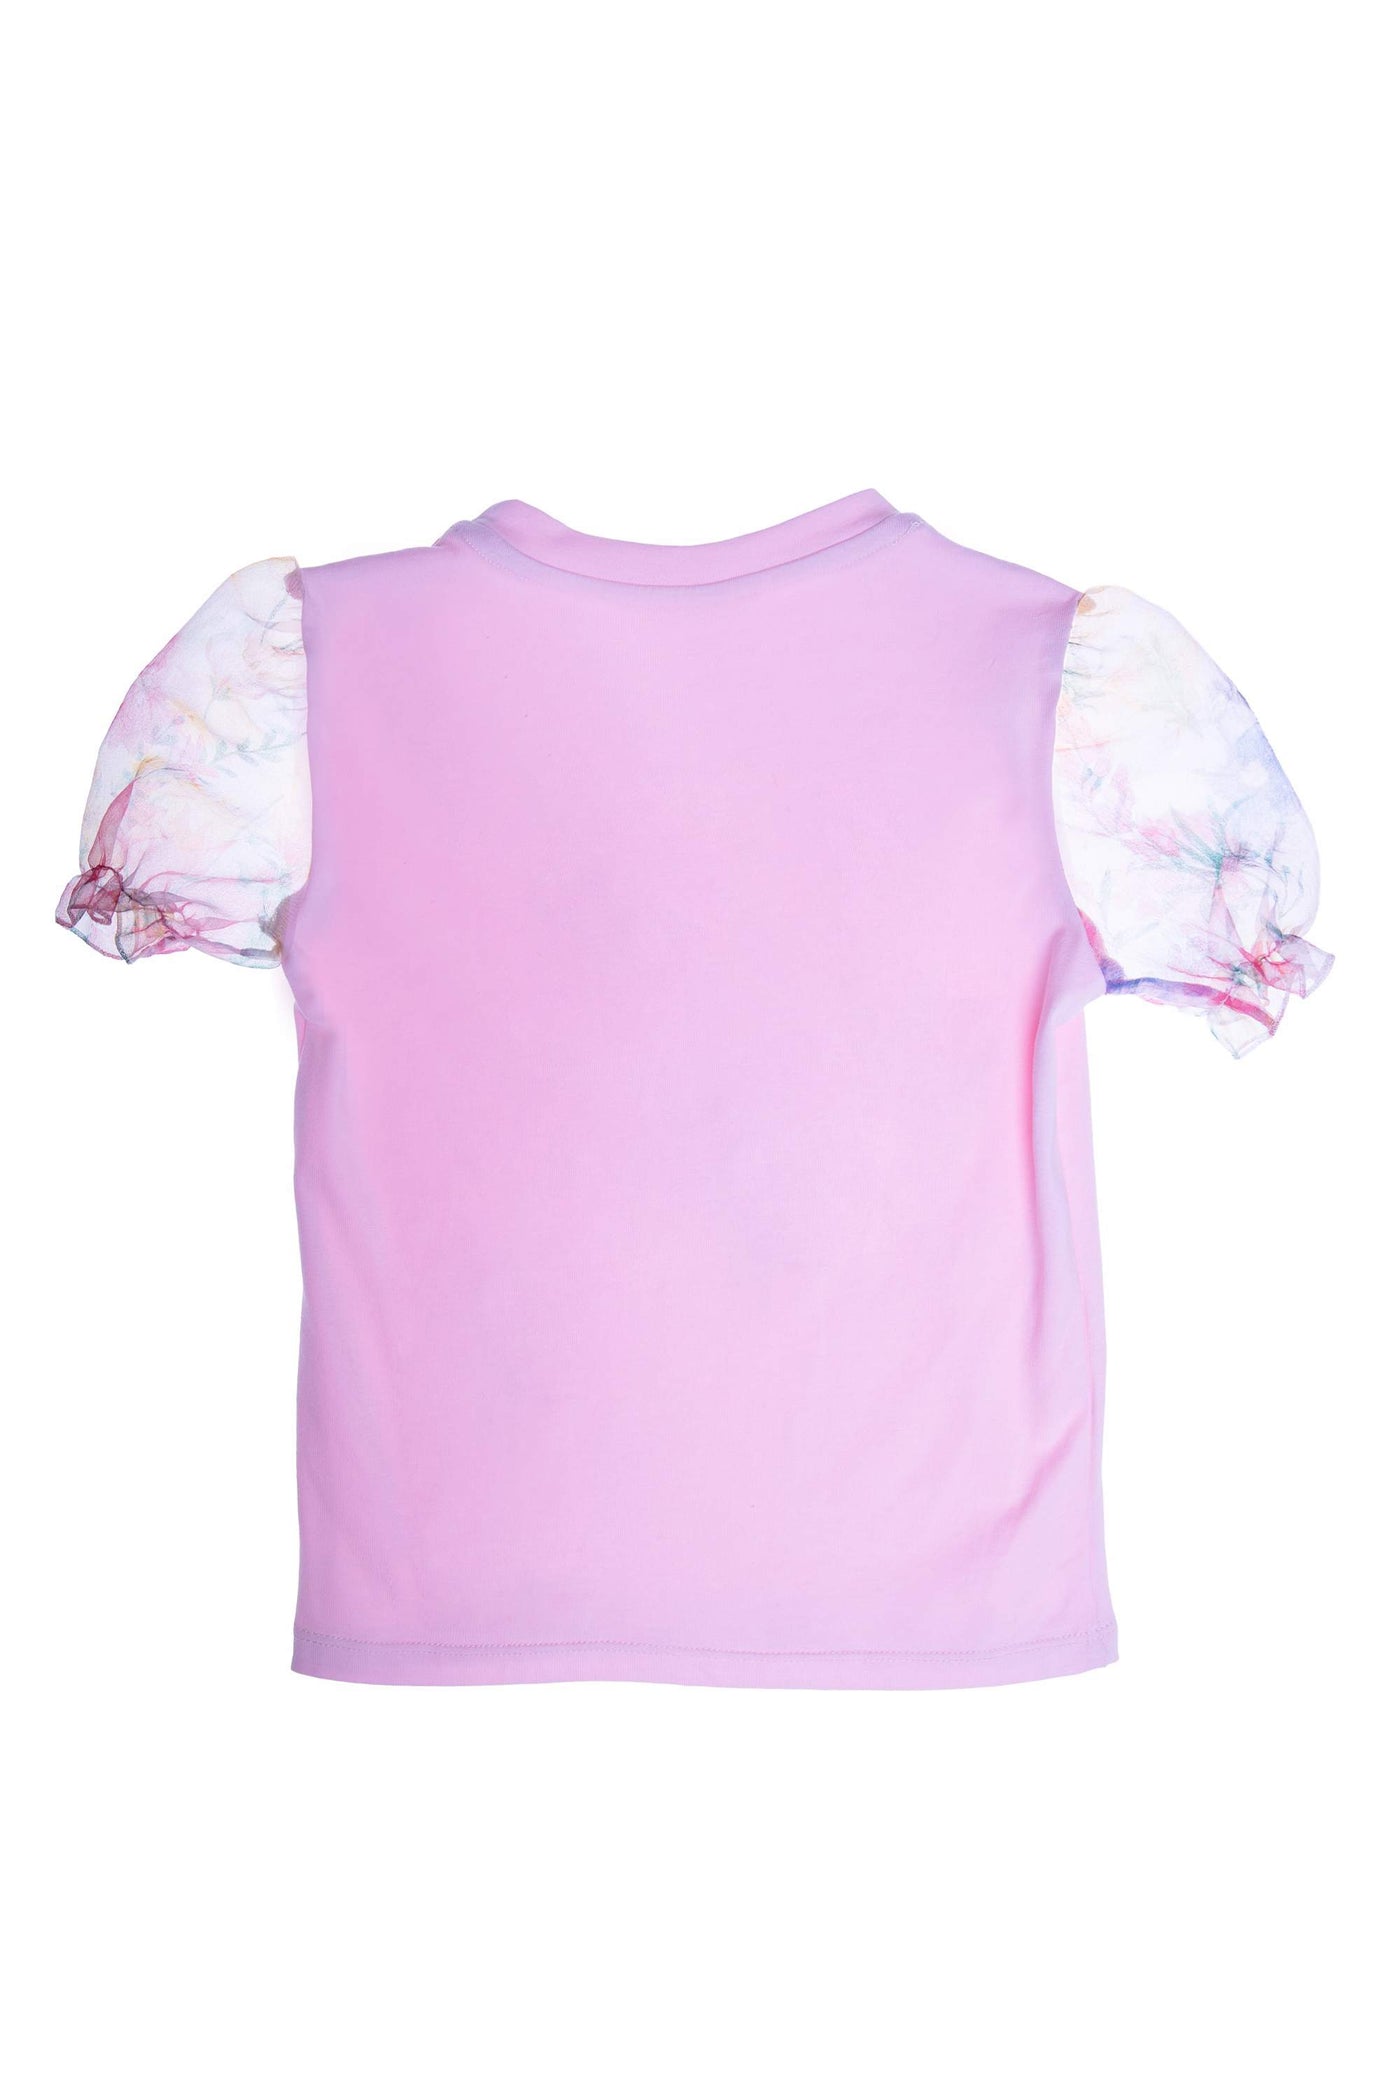 Pink hand-embellished floral t-shirt with organza sleeves